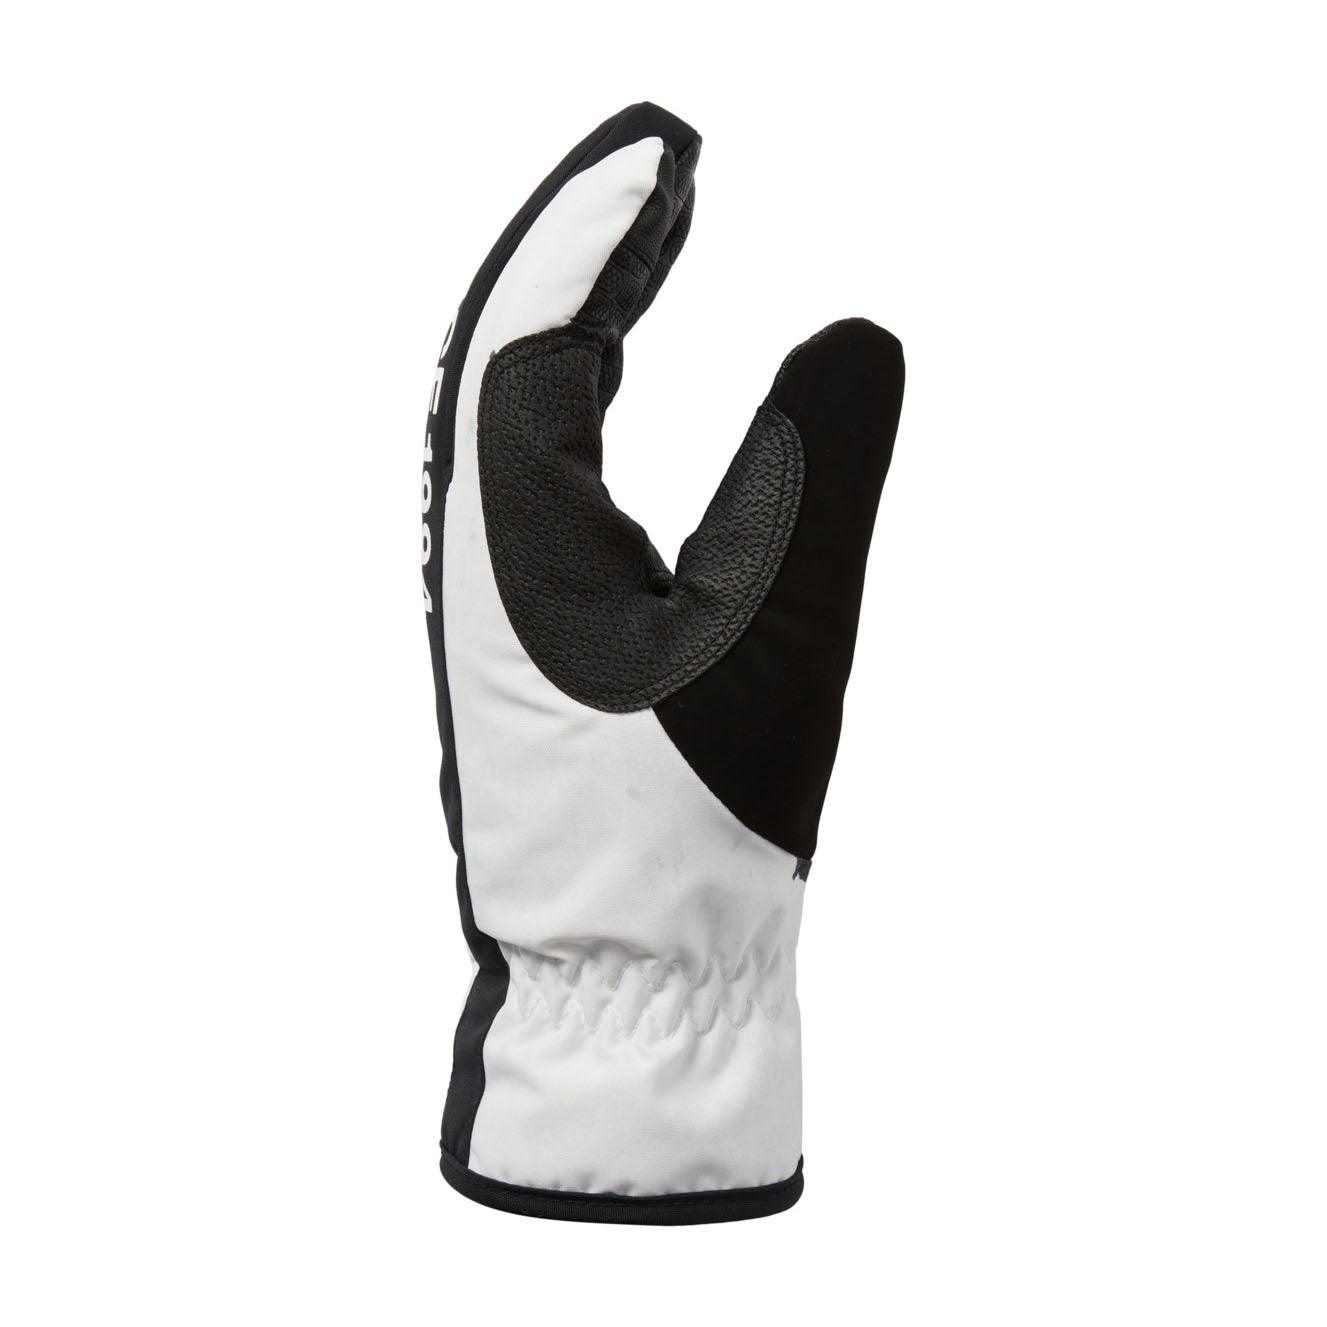 Guantes Dc Snow Salute Blanco Negro - Indy